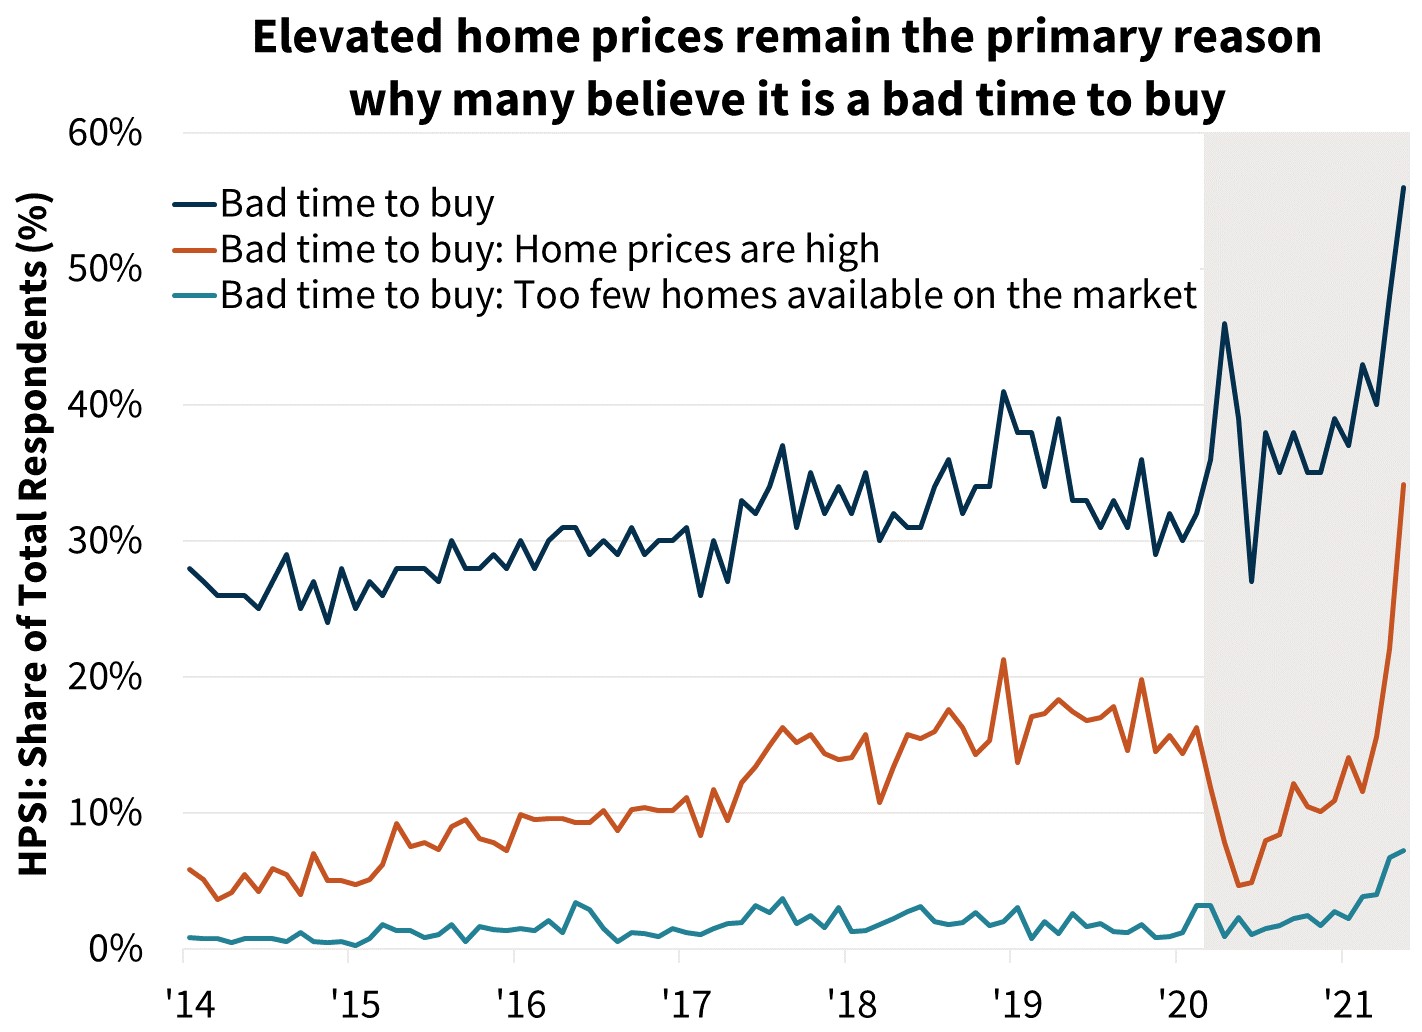  Elevated home prices remain the primary reason why many believe it is a bad time to buy 